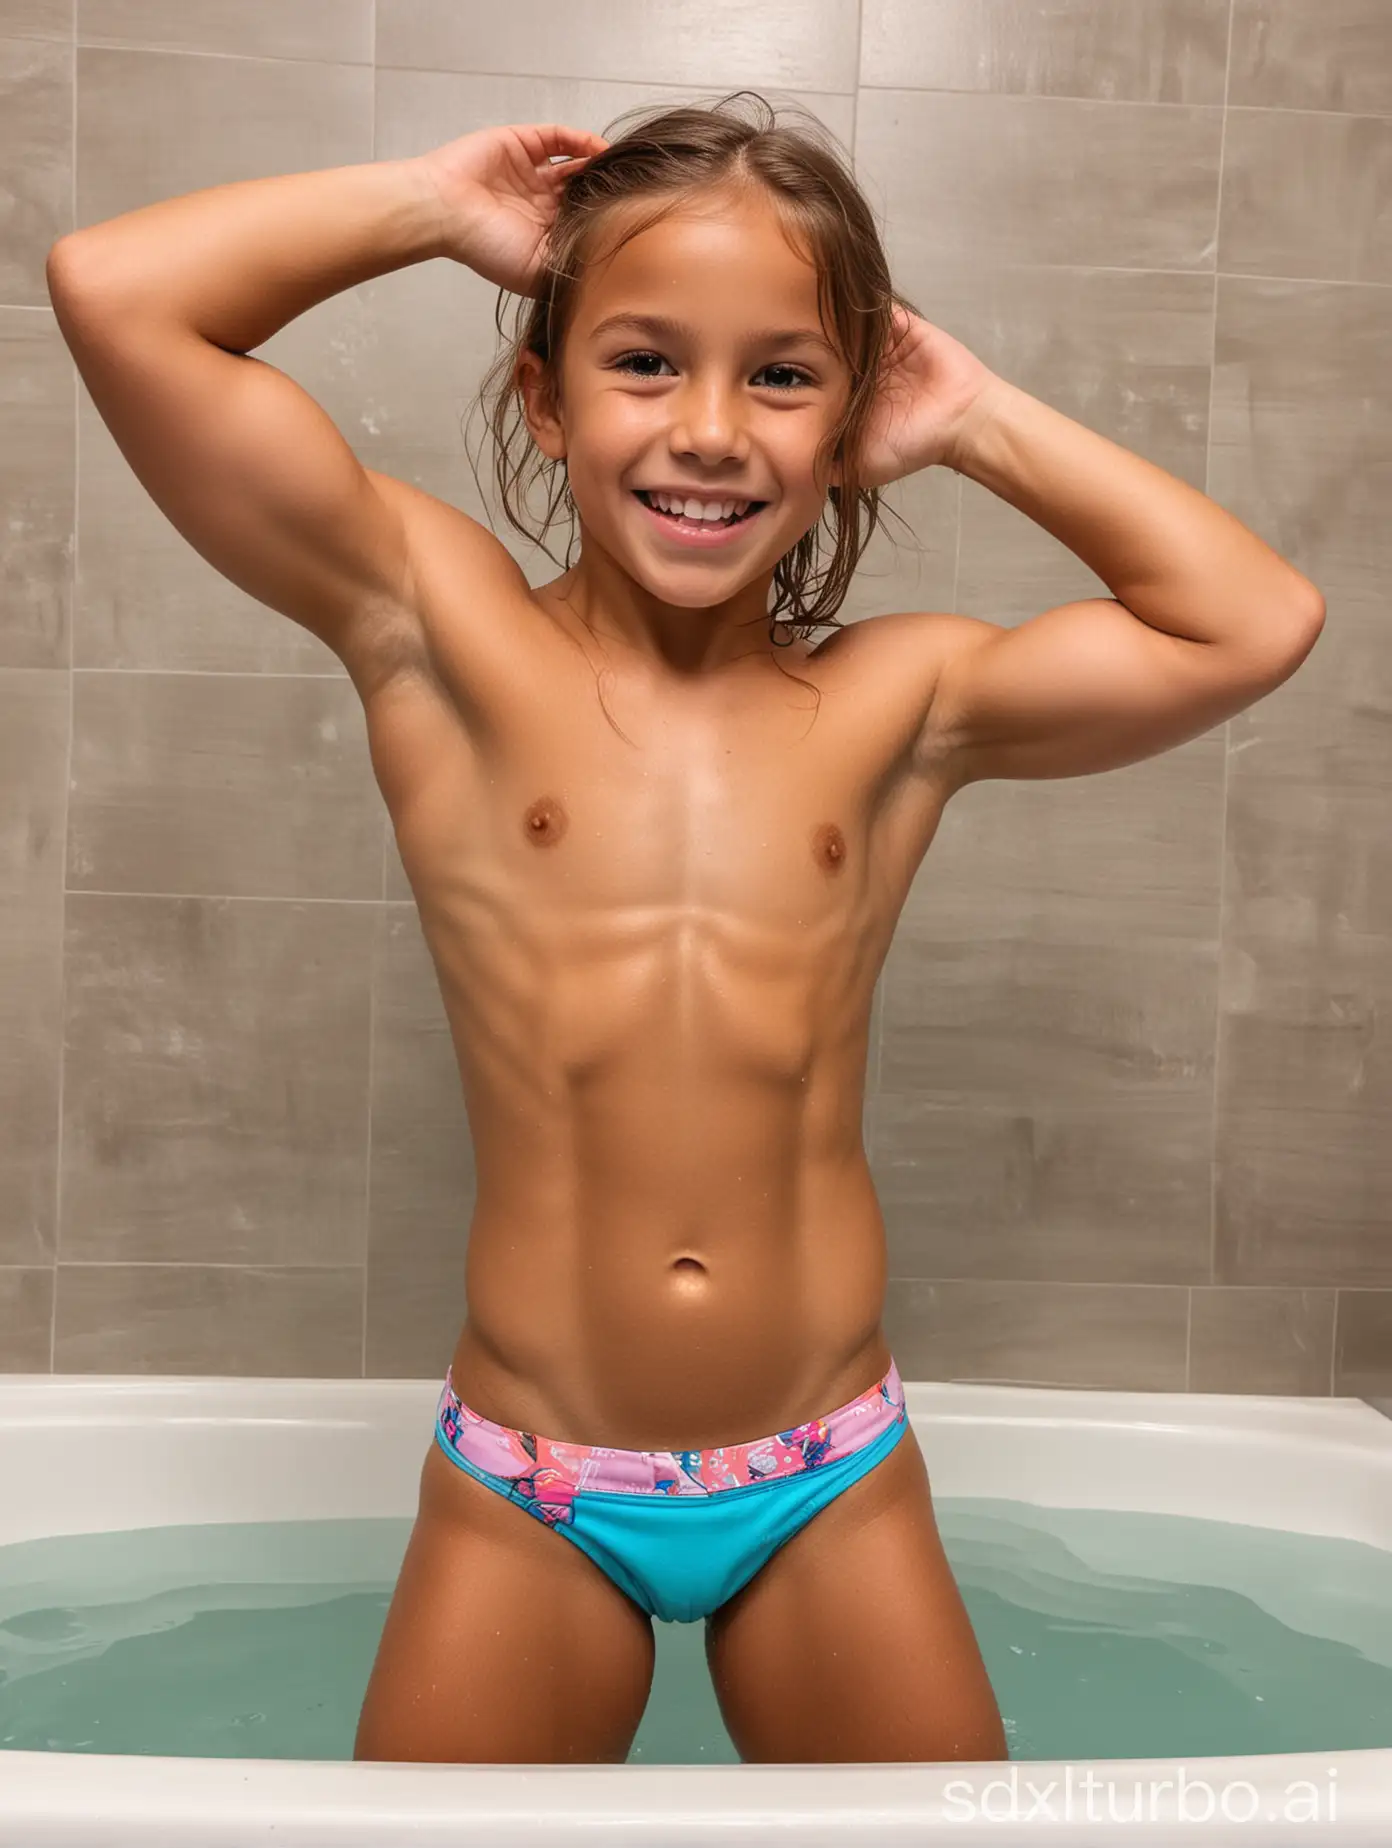 Vaness Paradis at 8 years old, muscular abs, showing her belly, bathing, happy